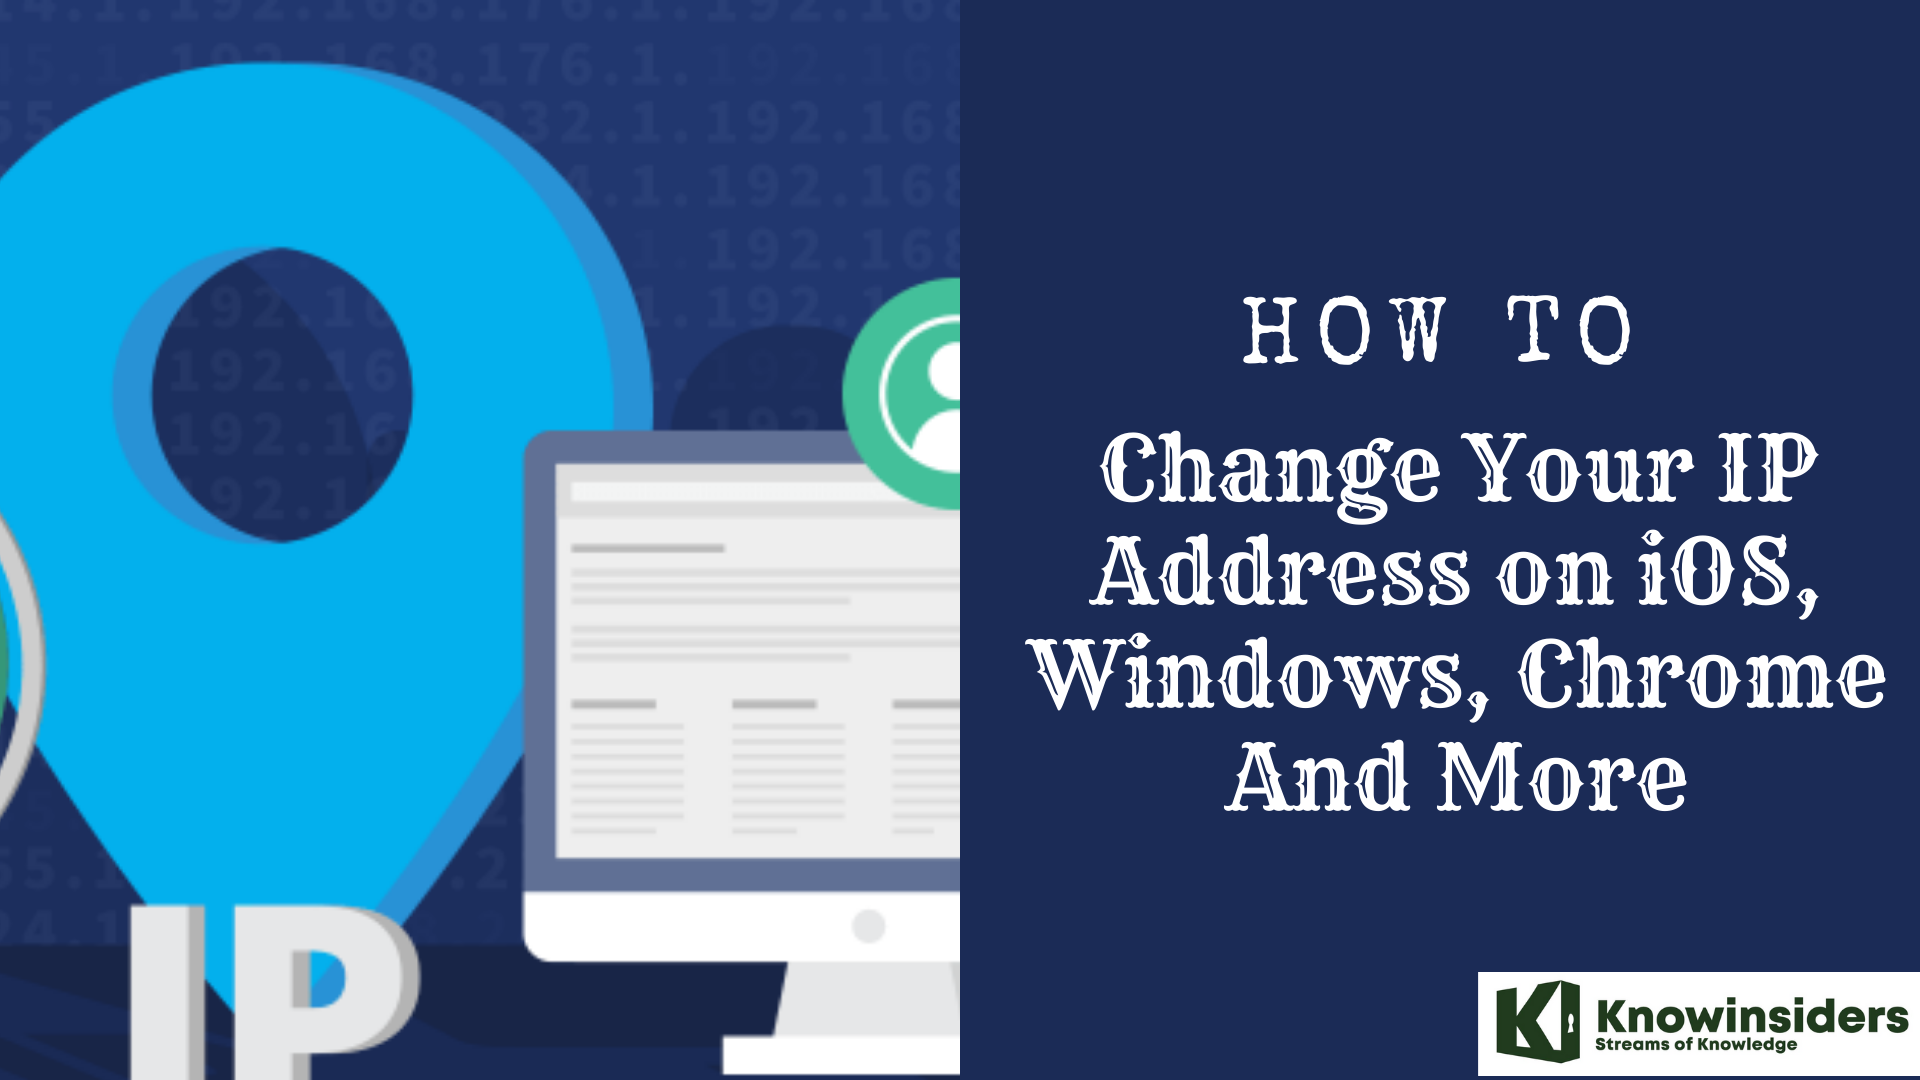 Simple Tips to Change Your IP Address on iOS, Windows, Chrome and More